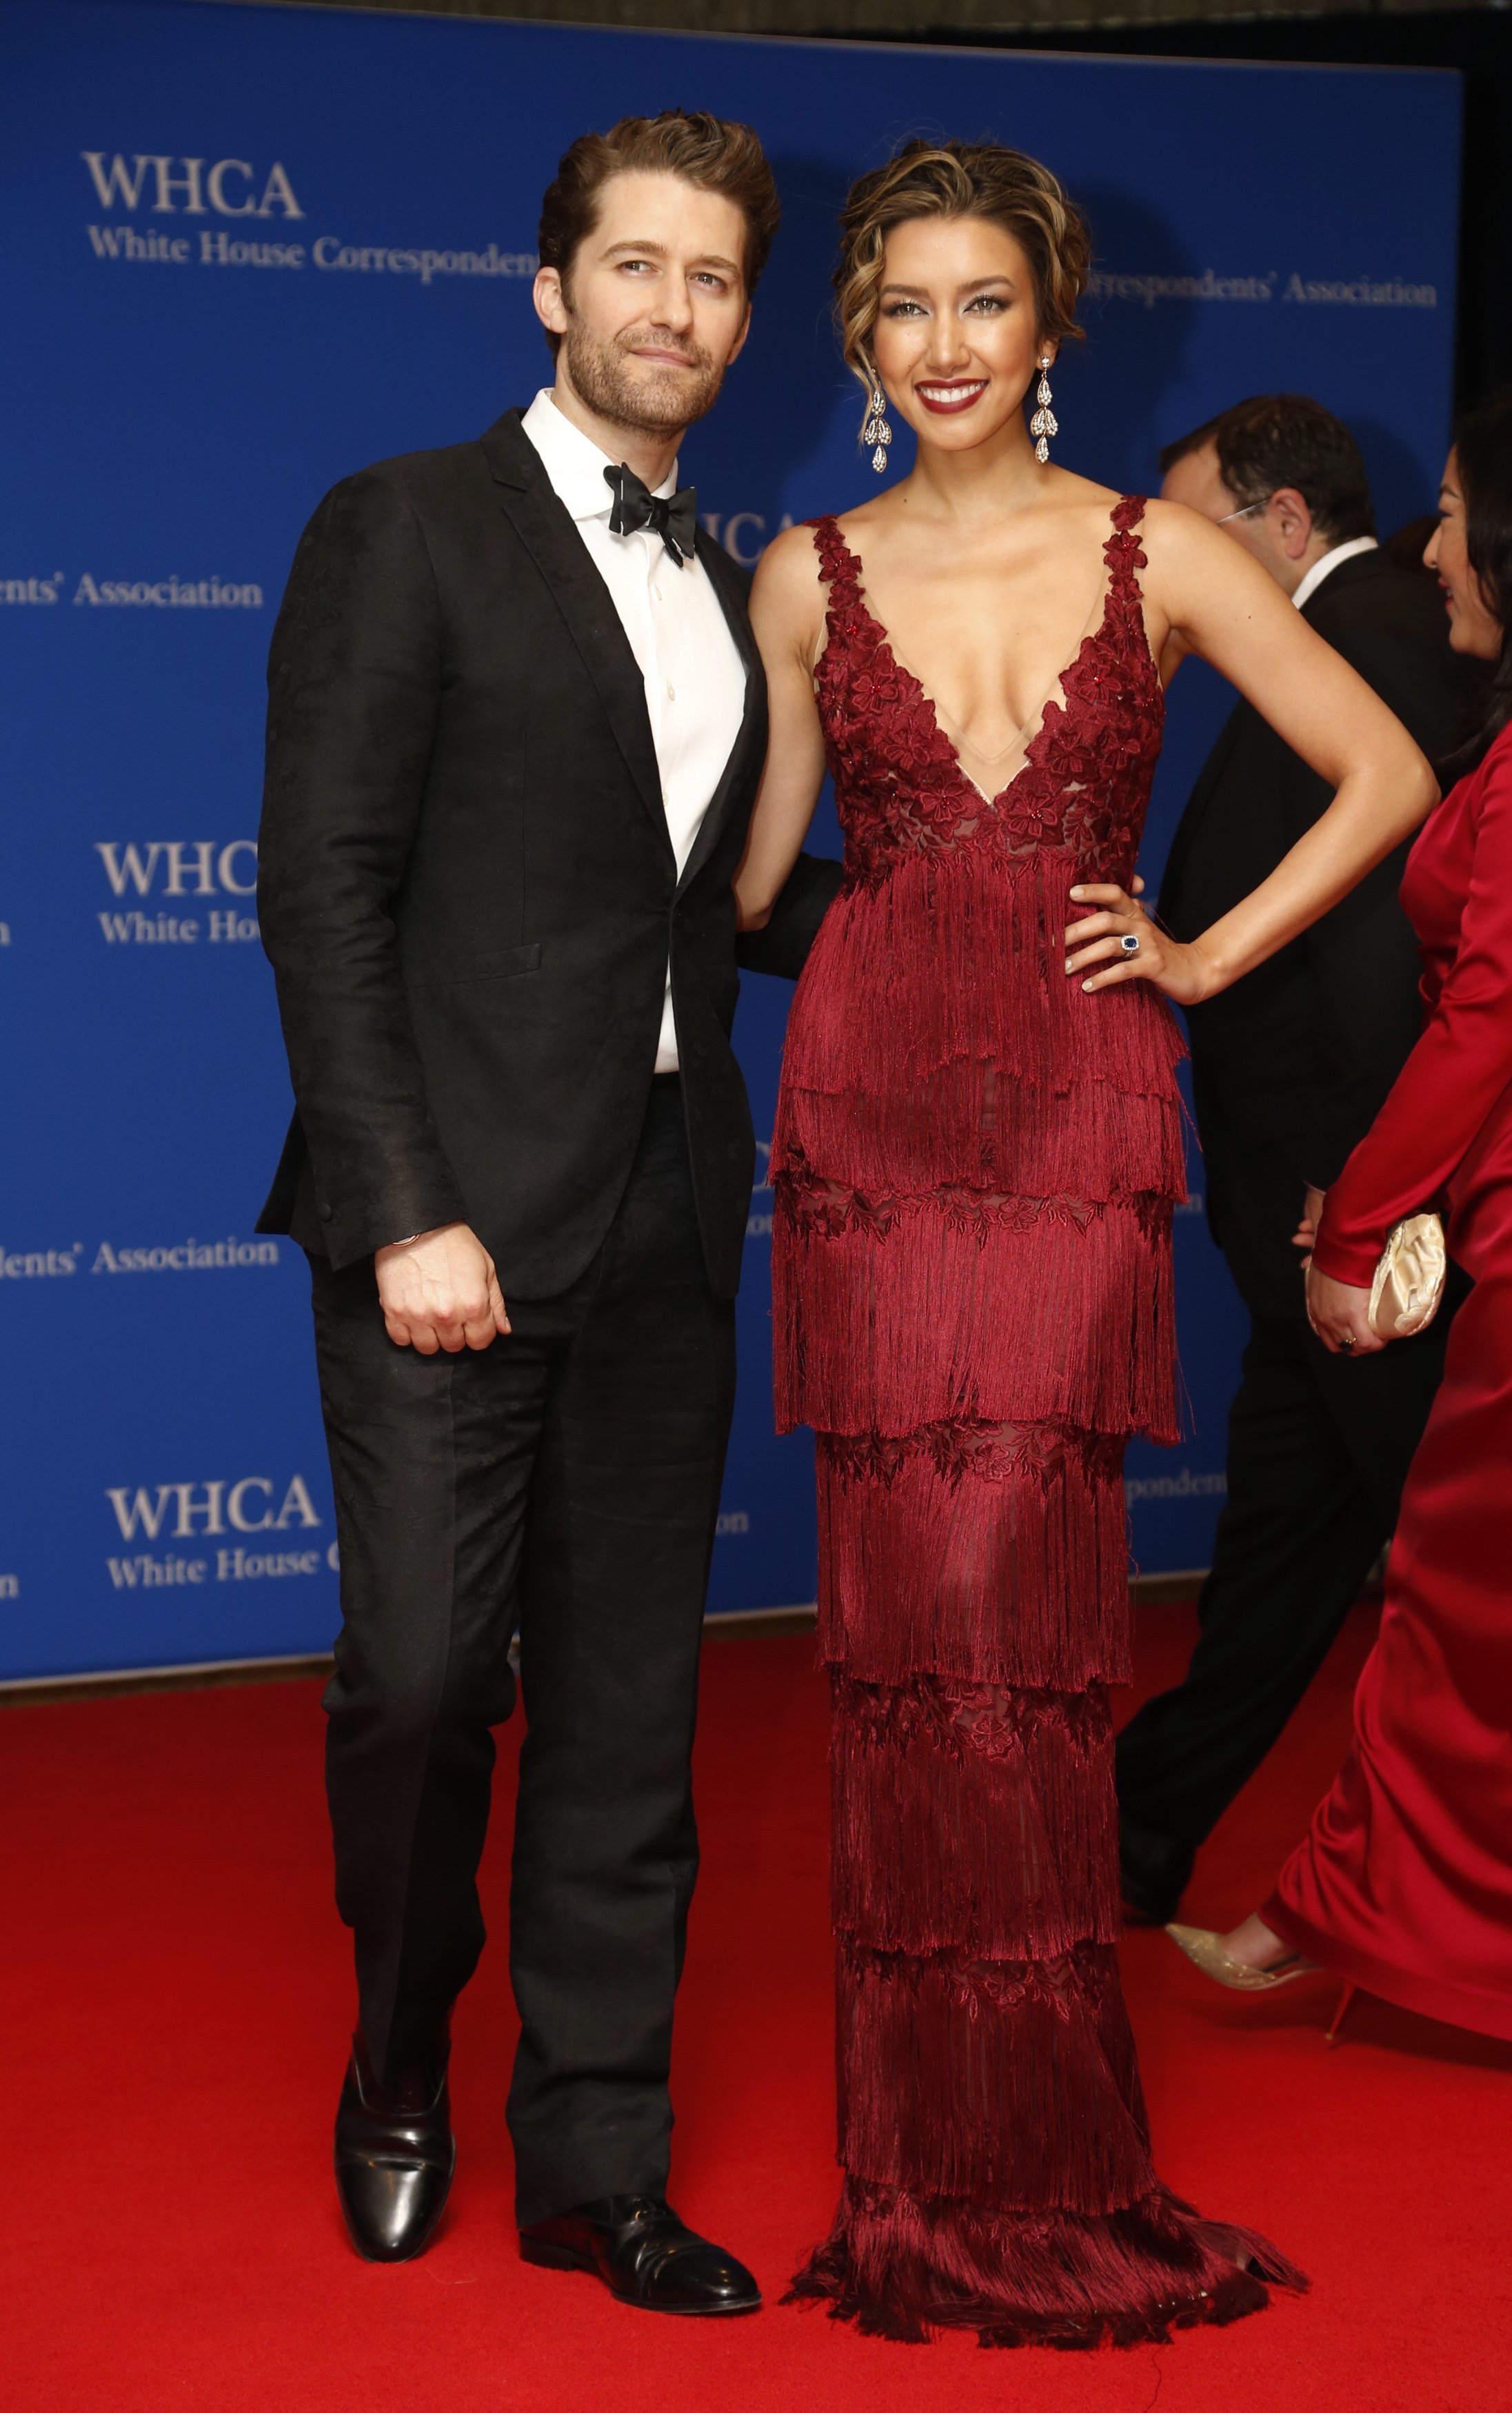 Actor Matthew Morrison and wife, Renee Puente, arrive on the red carpet for the annual White House Correspondents Association Dinner in Washington